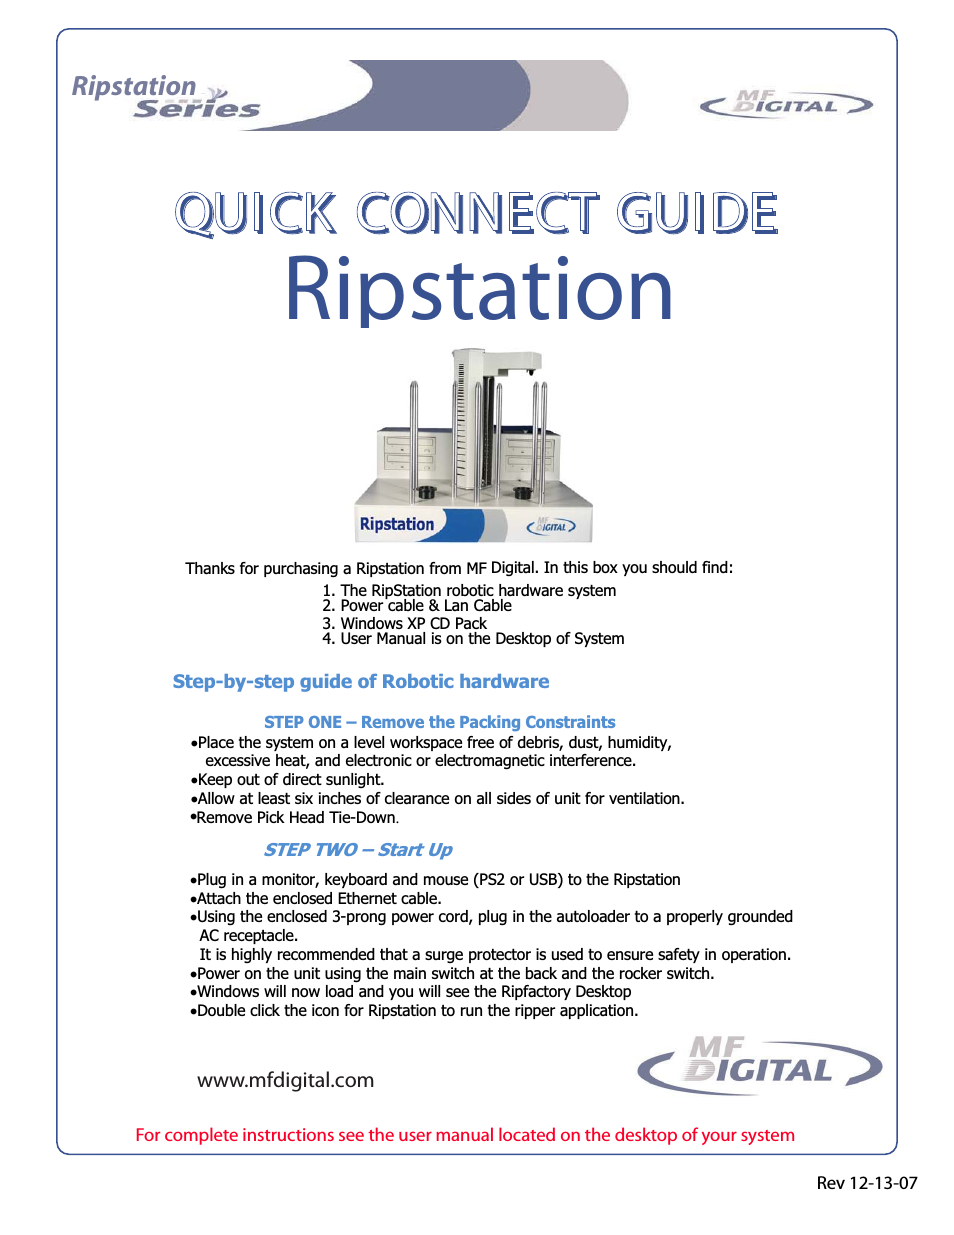 Ripstation Quick Start Guide